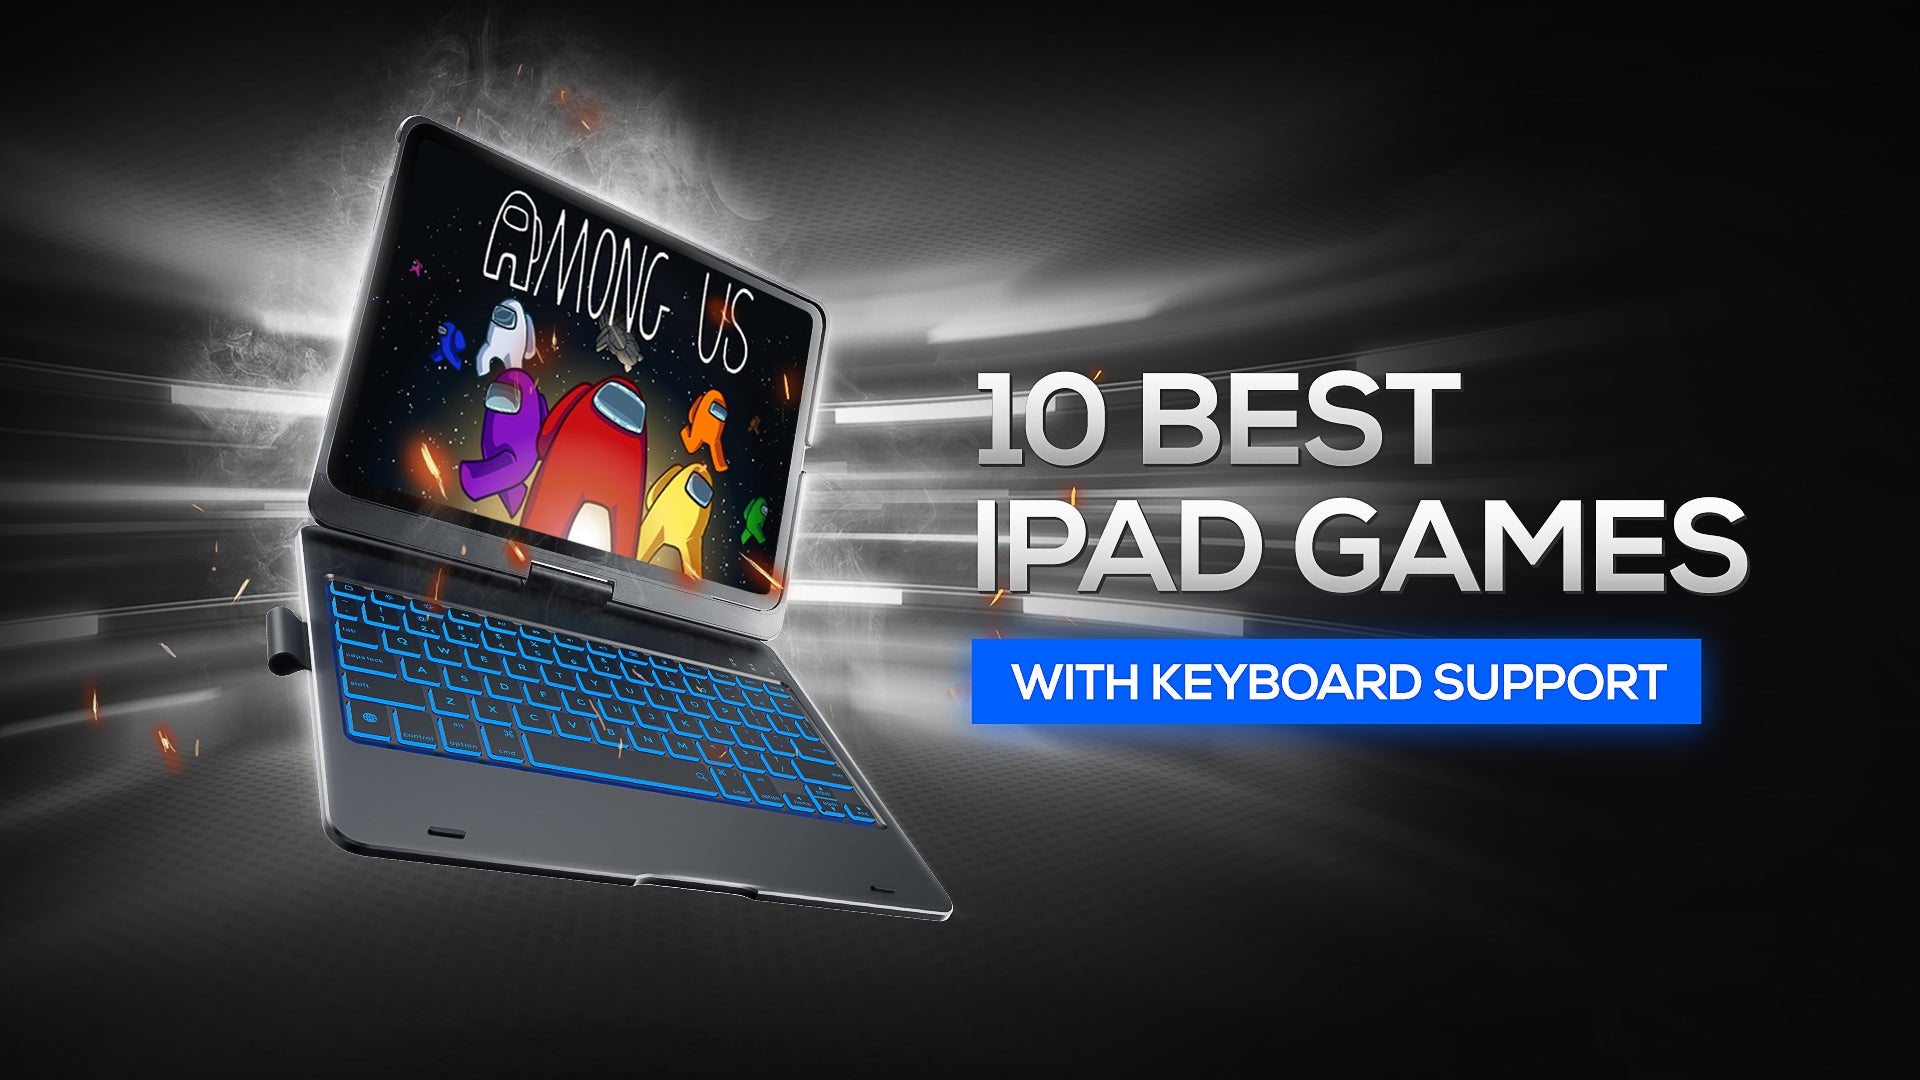 10 Best iPad Games with Keyboard Support